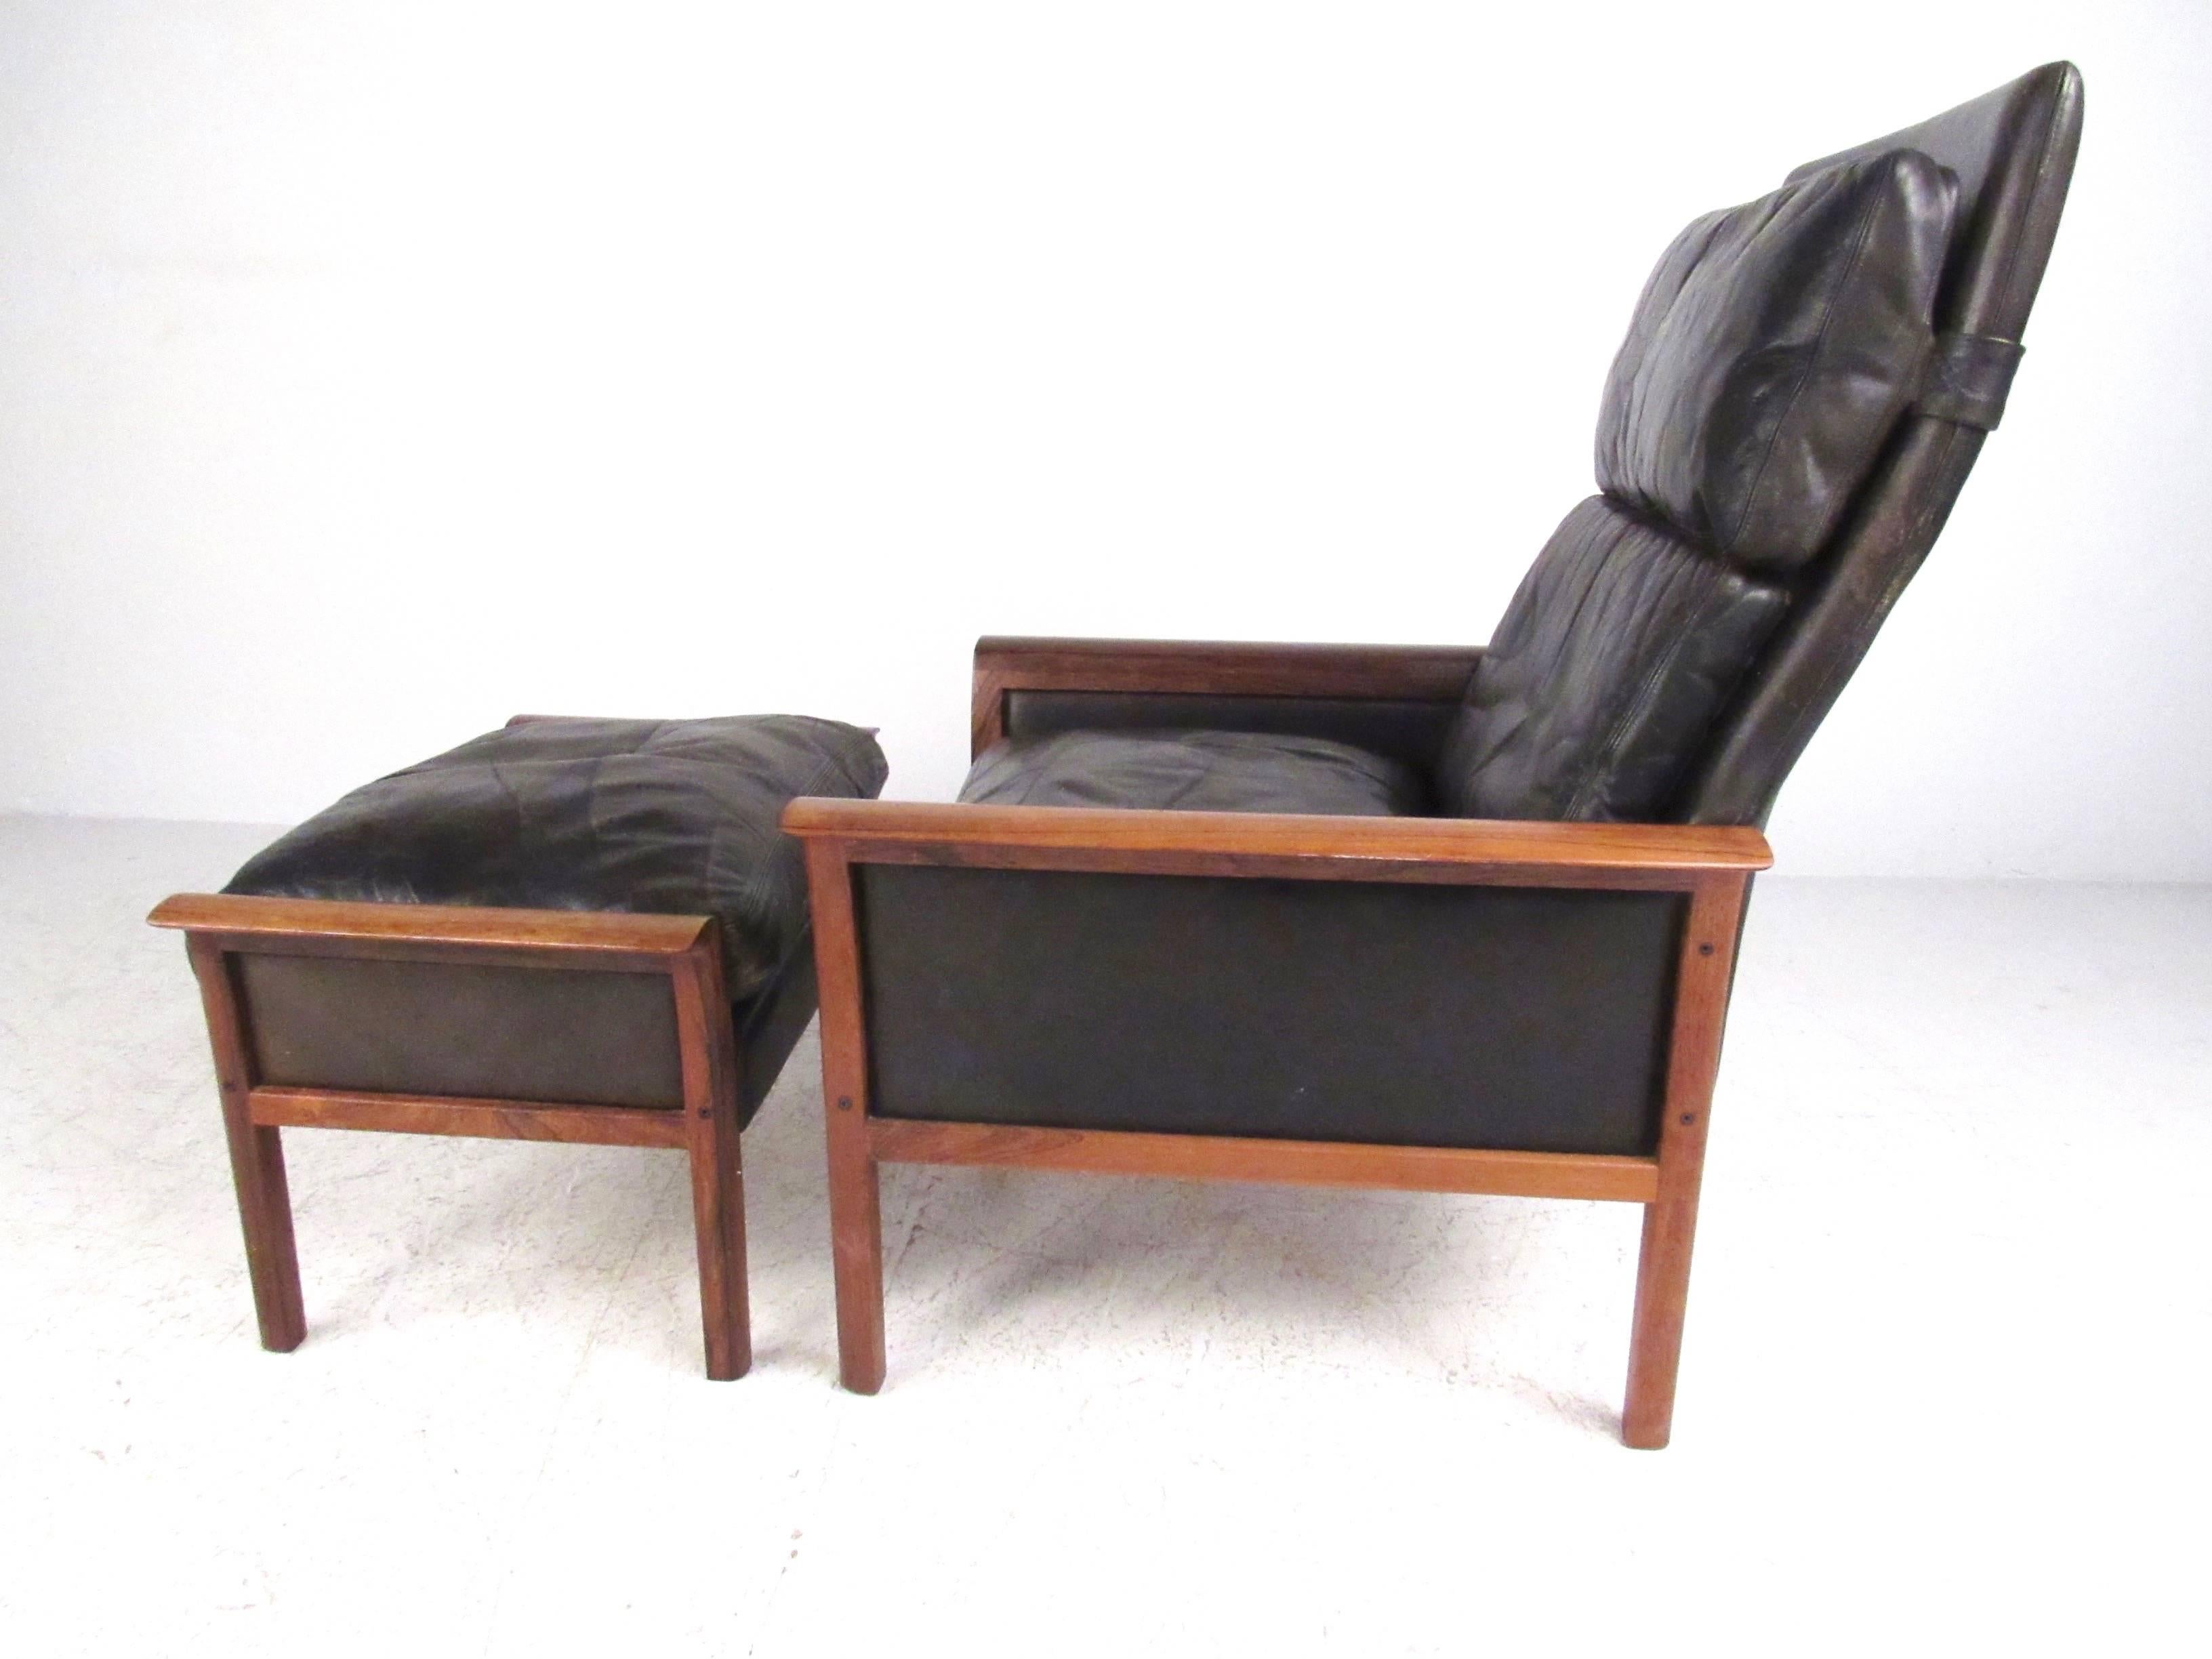 This stunning Mid-Century Norwegian lounge chair features rich vintage leather and sculpted arms with a well-constructed rosewood frame. The high back ergonomic design paired with the matching ottoman make this Knut Saeter lounge chair a beautiful